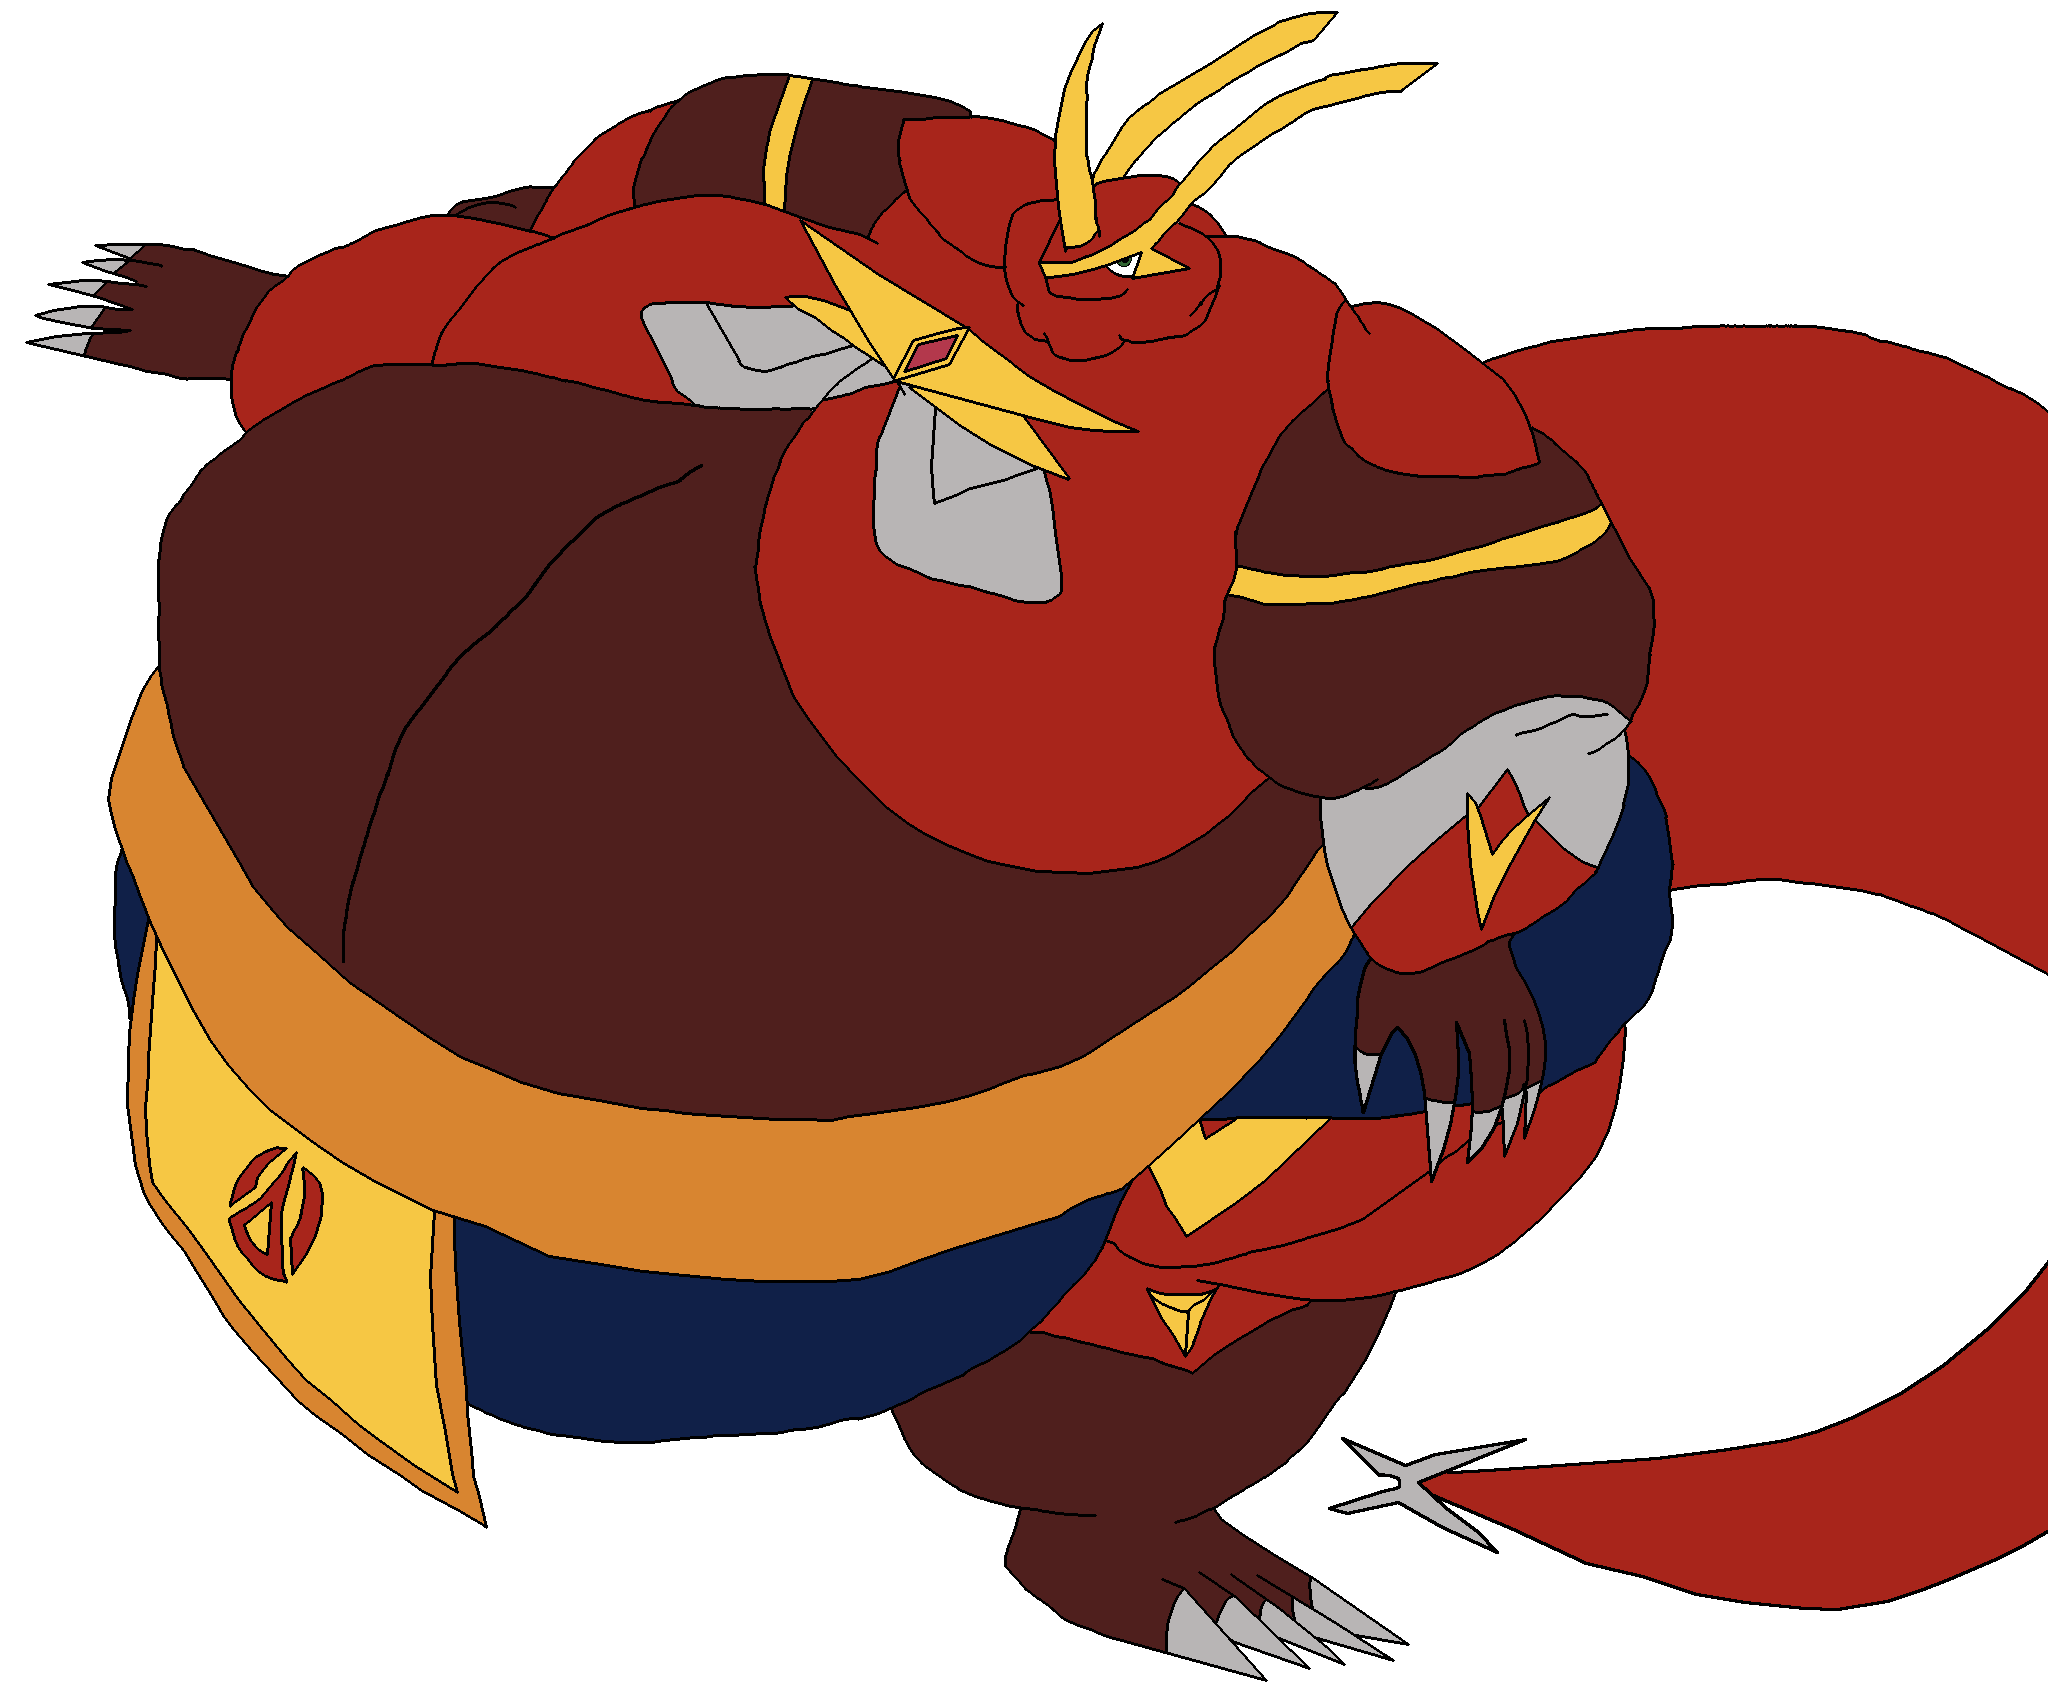 Sumo stomp like a champ 2 by Dragonoid4ever on DeviantArt